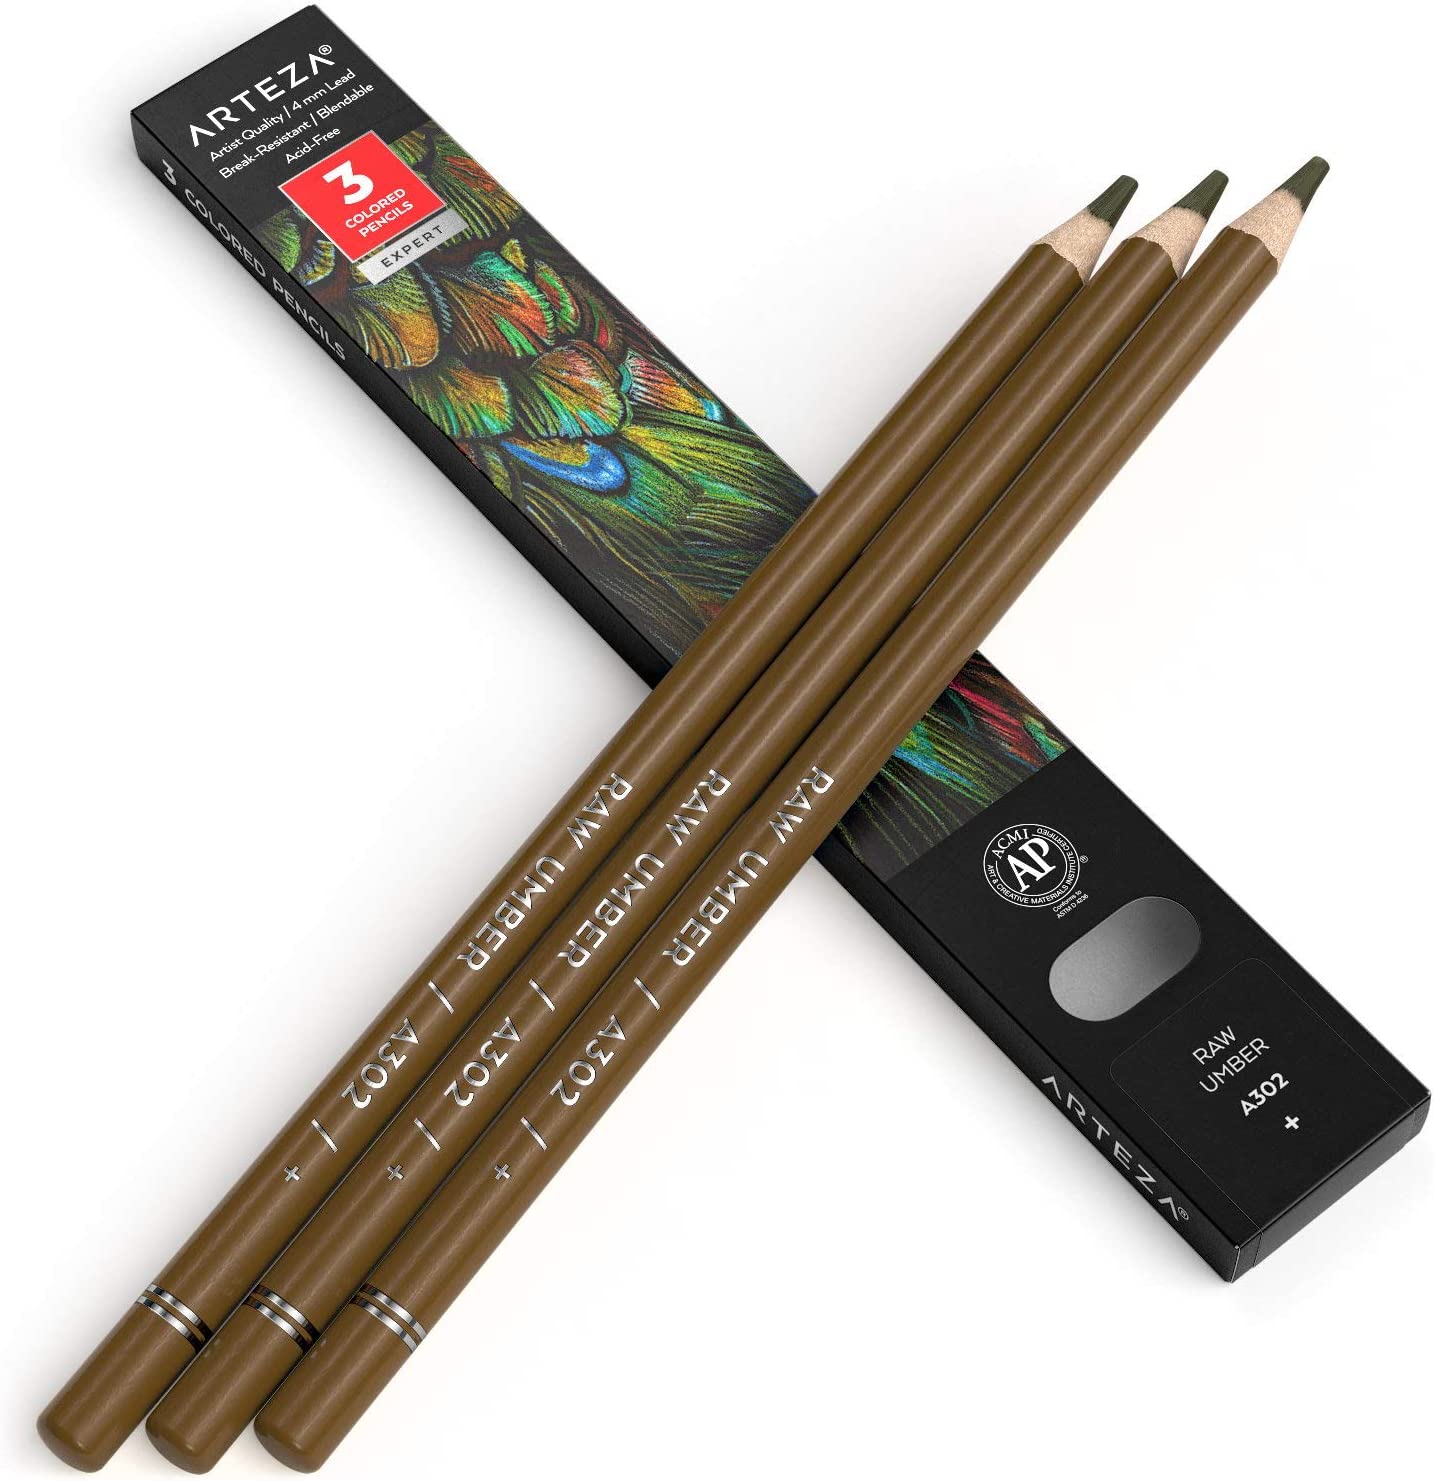 Arteza Expert Colored Pencils, A302 Raw Umber - 3 Pack